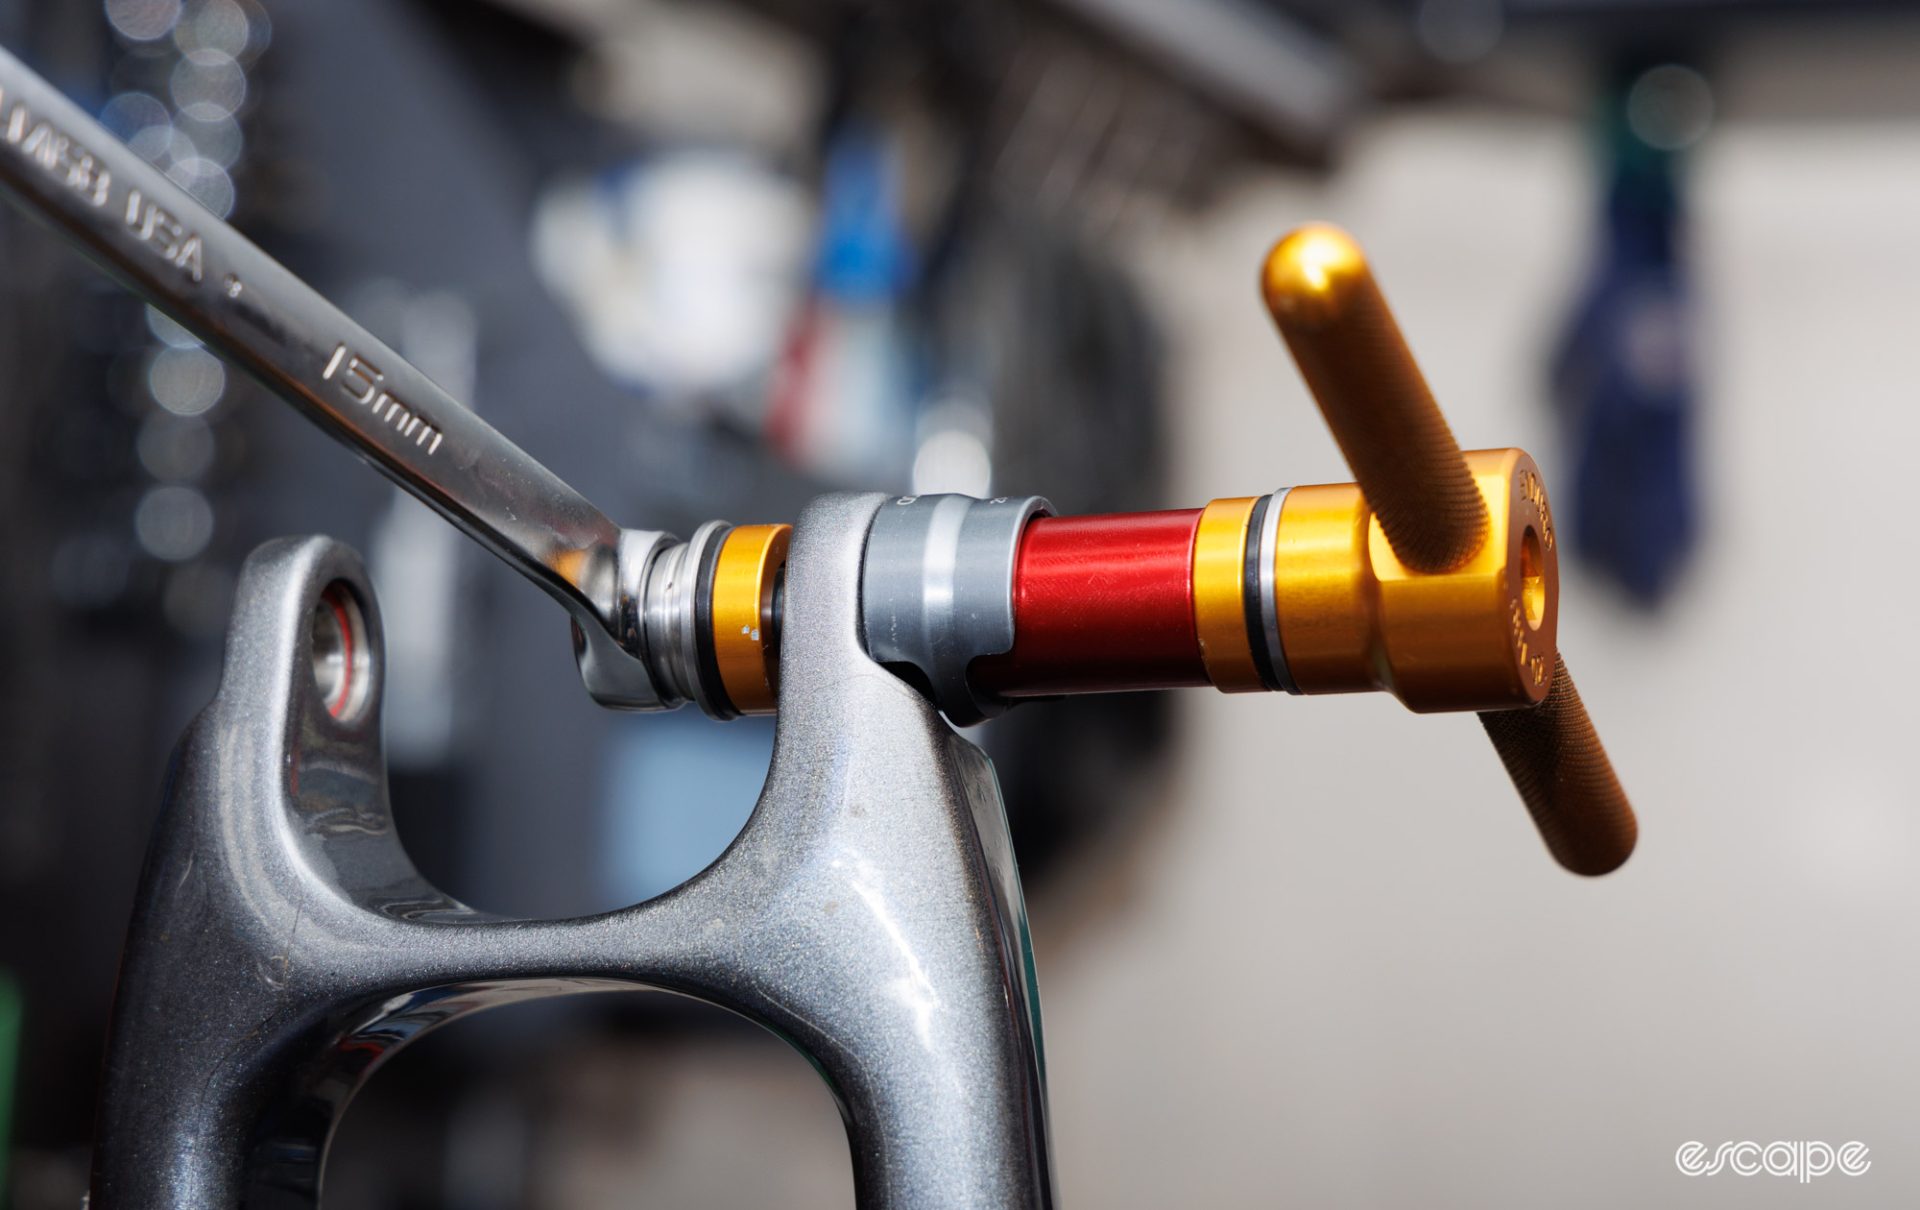 Enduro BRT-051 in use on a seat stay bearing. Gold handles are the focal point of the image. 